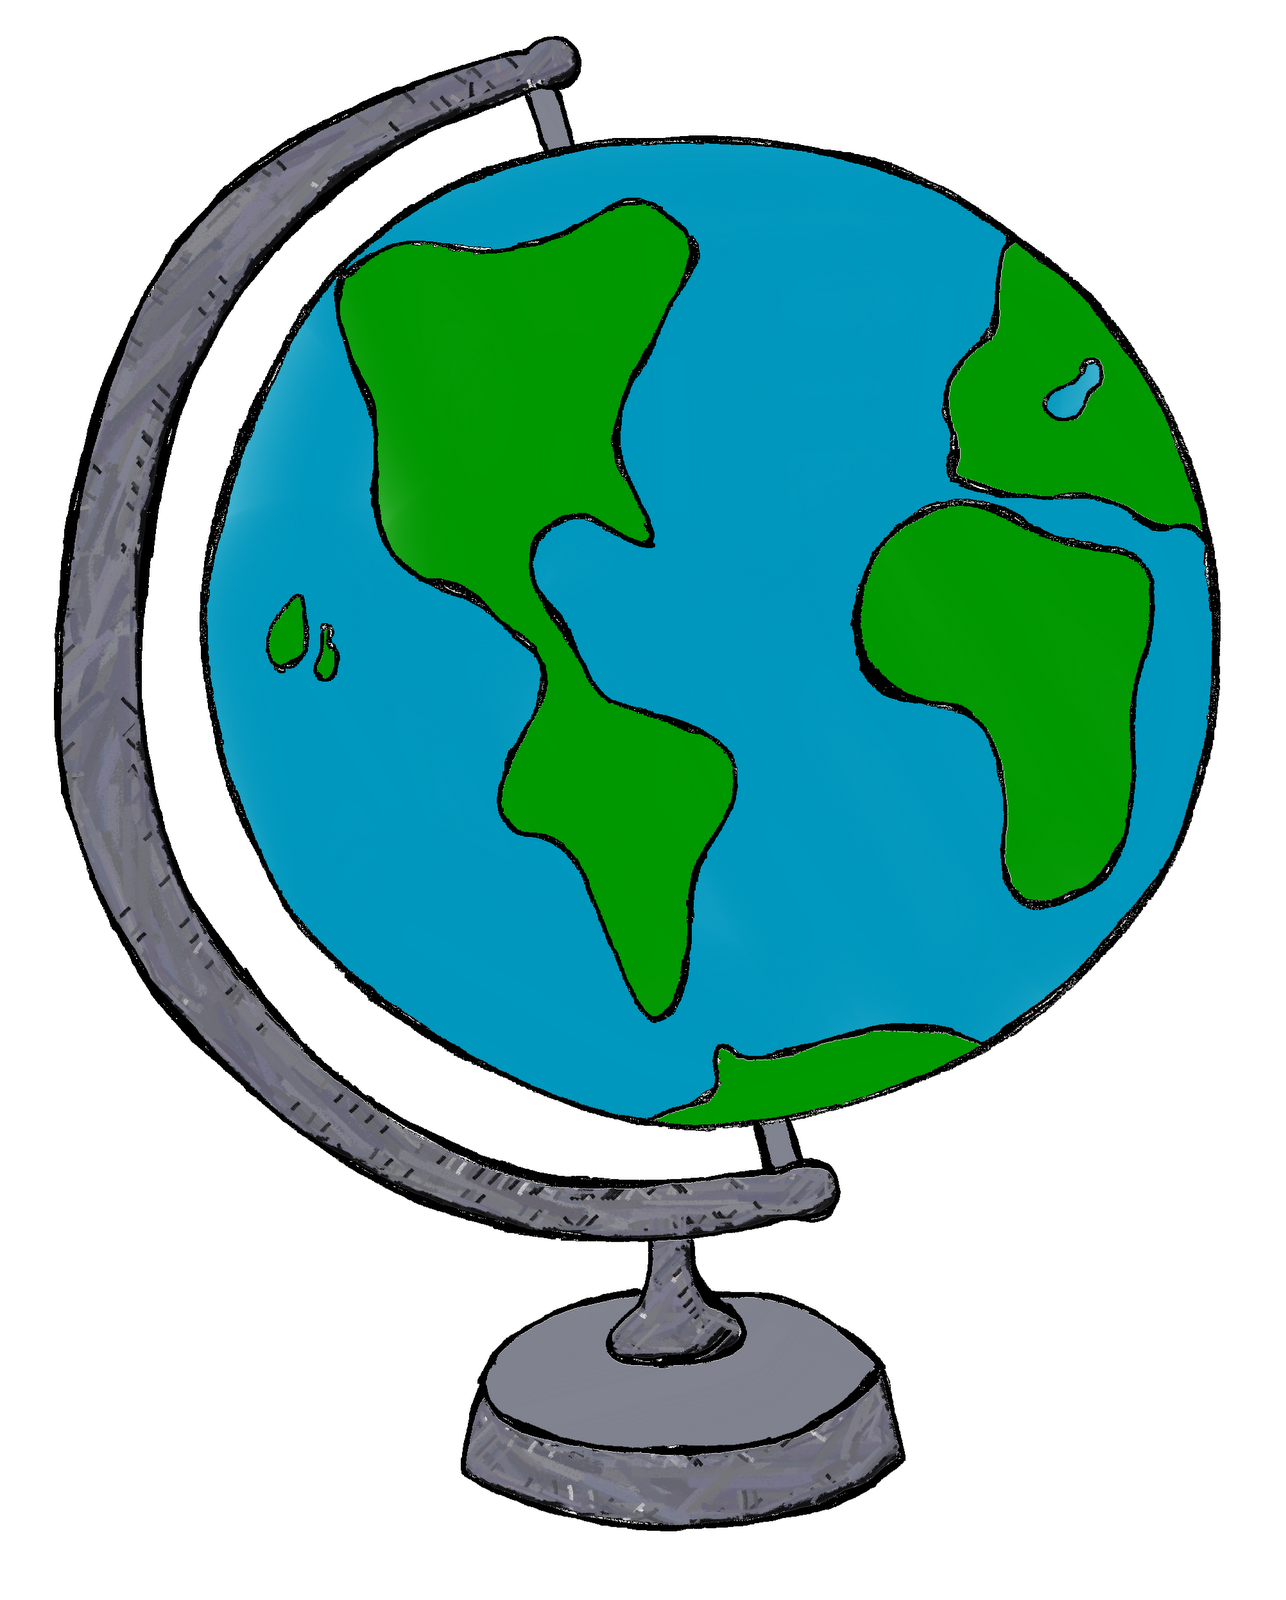 Globe earth clipart black and white free images